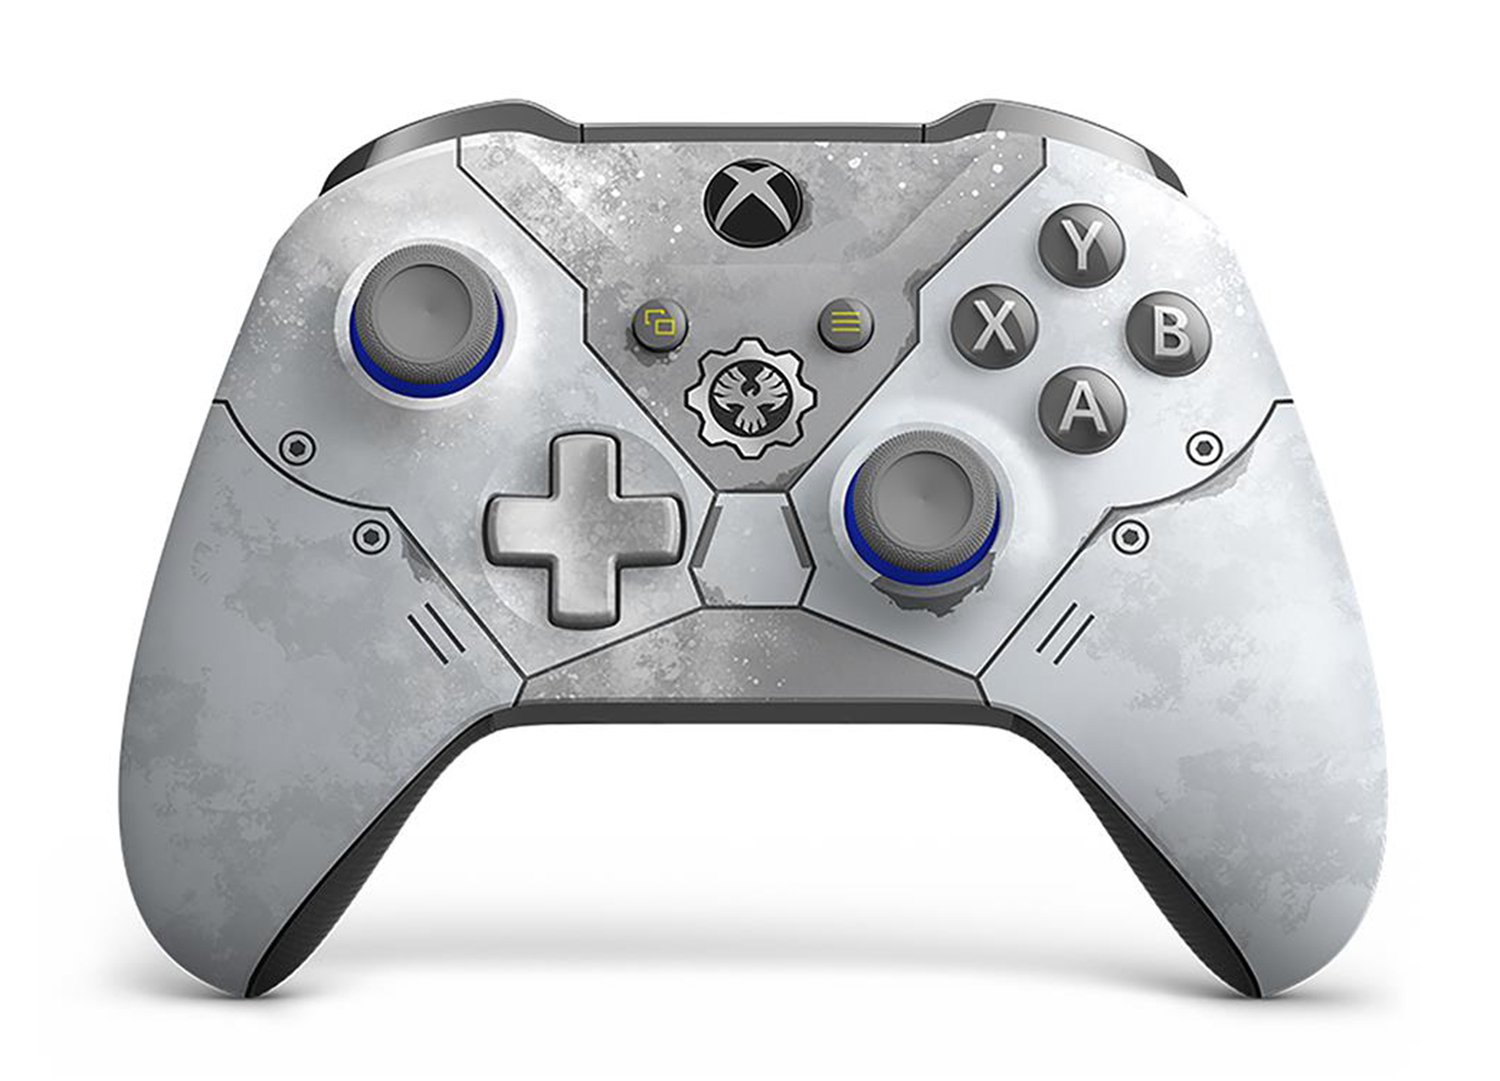 Limited Edition Xbox One Wireless Controller - Gears 5